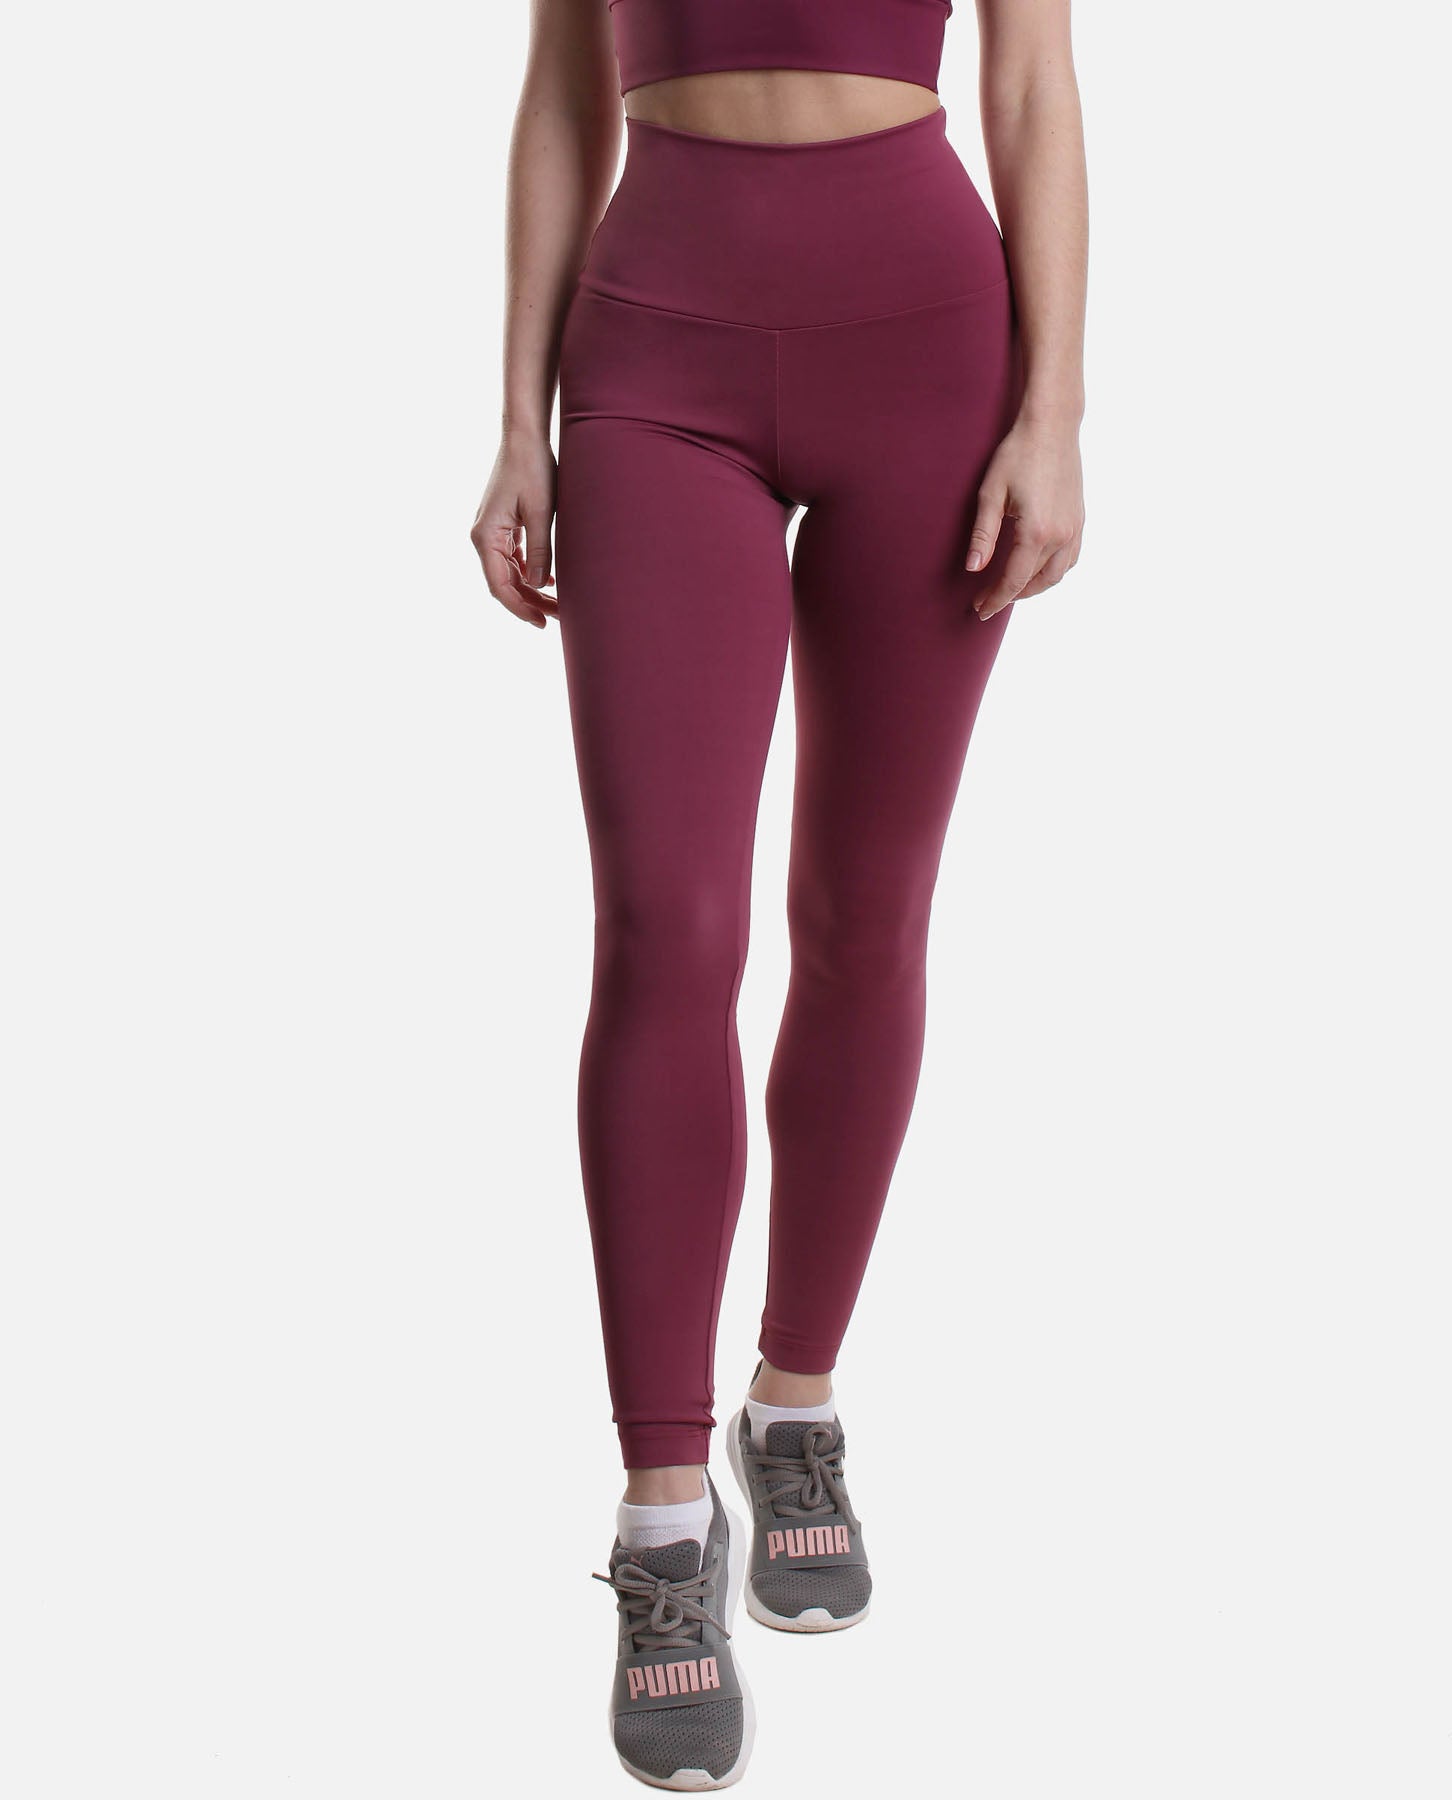  Women Gym Tighty Leggings With Pocket Combonavy Maroon / Casual